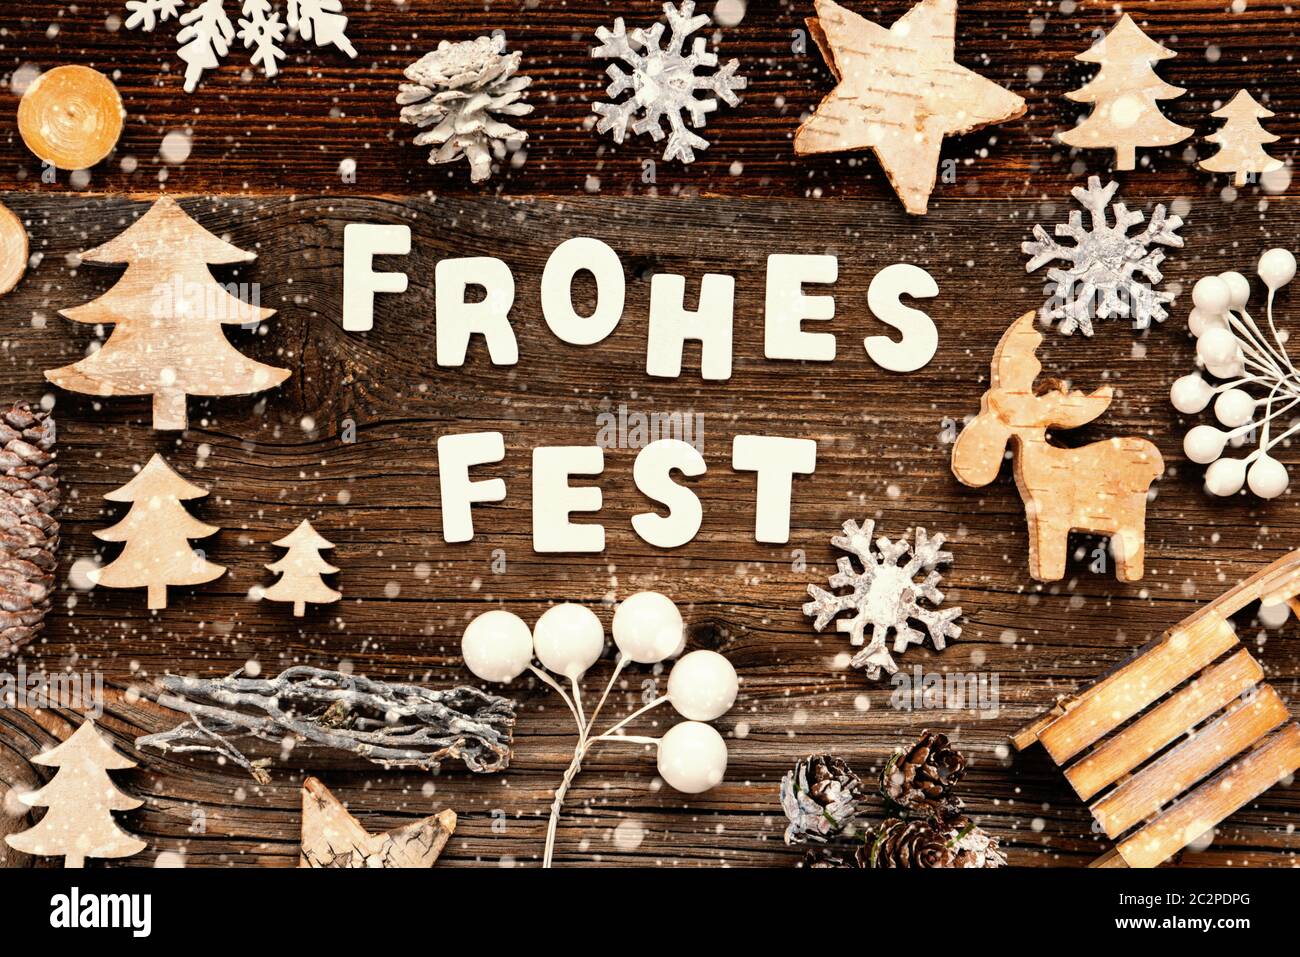 Letters Building The Word Frohes Fest Means Merry Christmas. Wooden Christmas Decoration Like Tree, Sled And Star. Brown Wooden Background With Snowfl Stock Photo